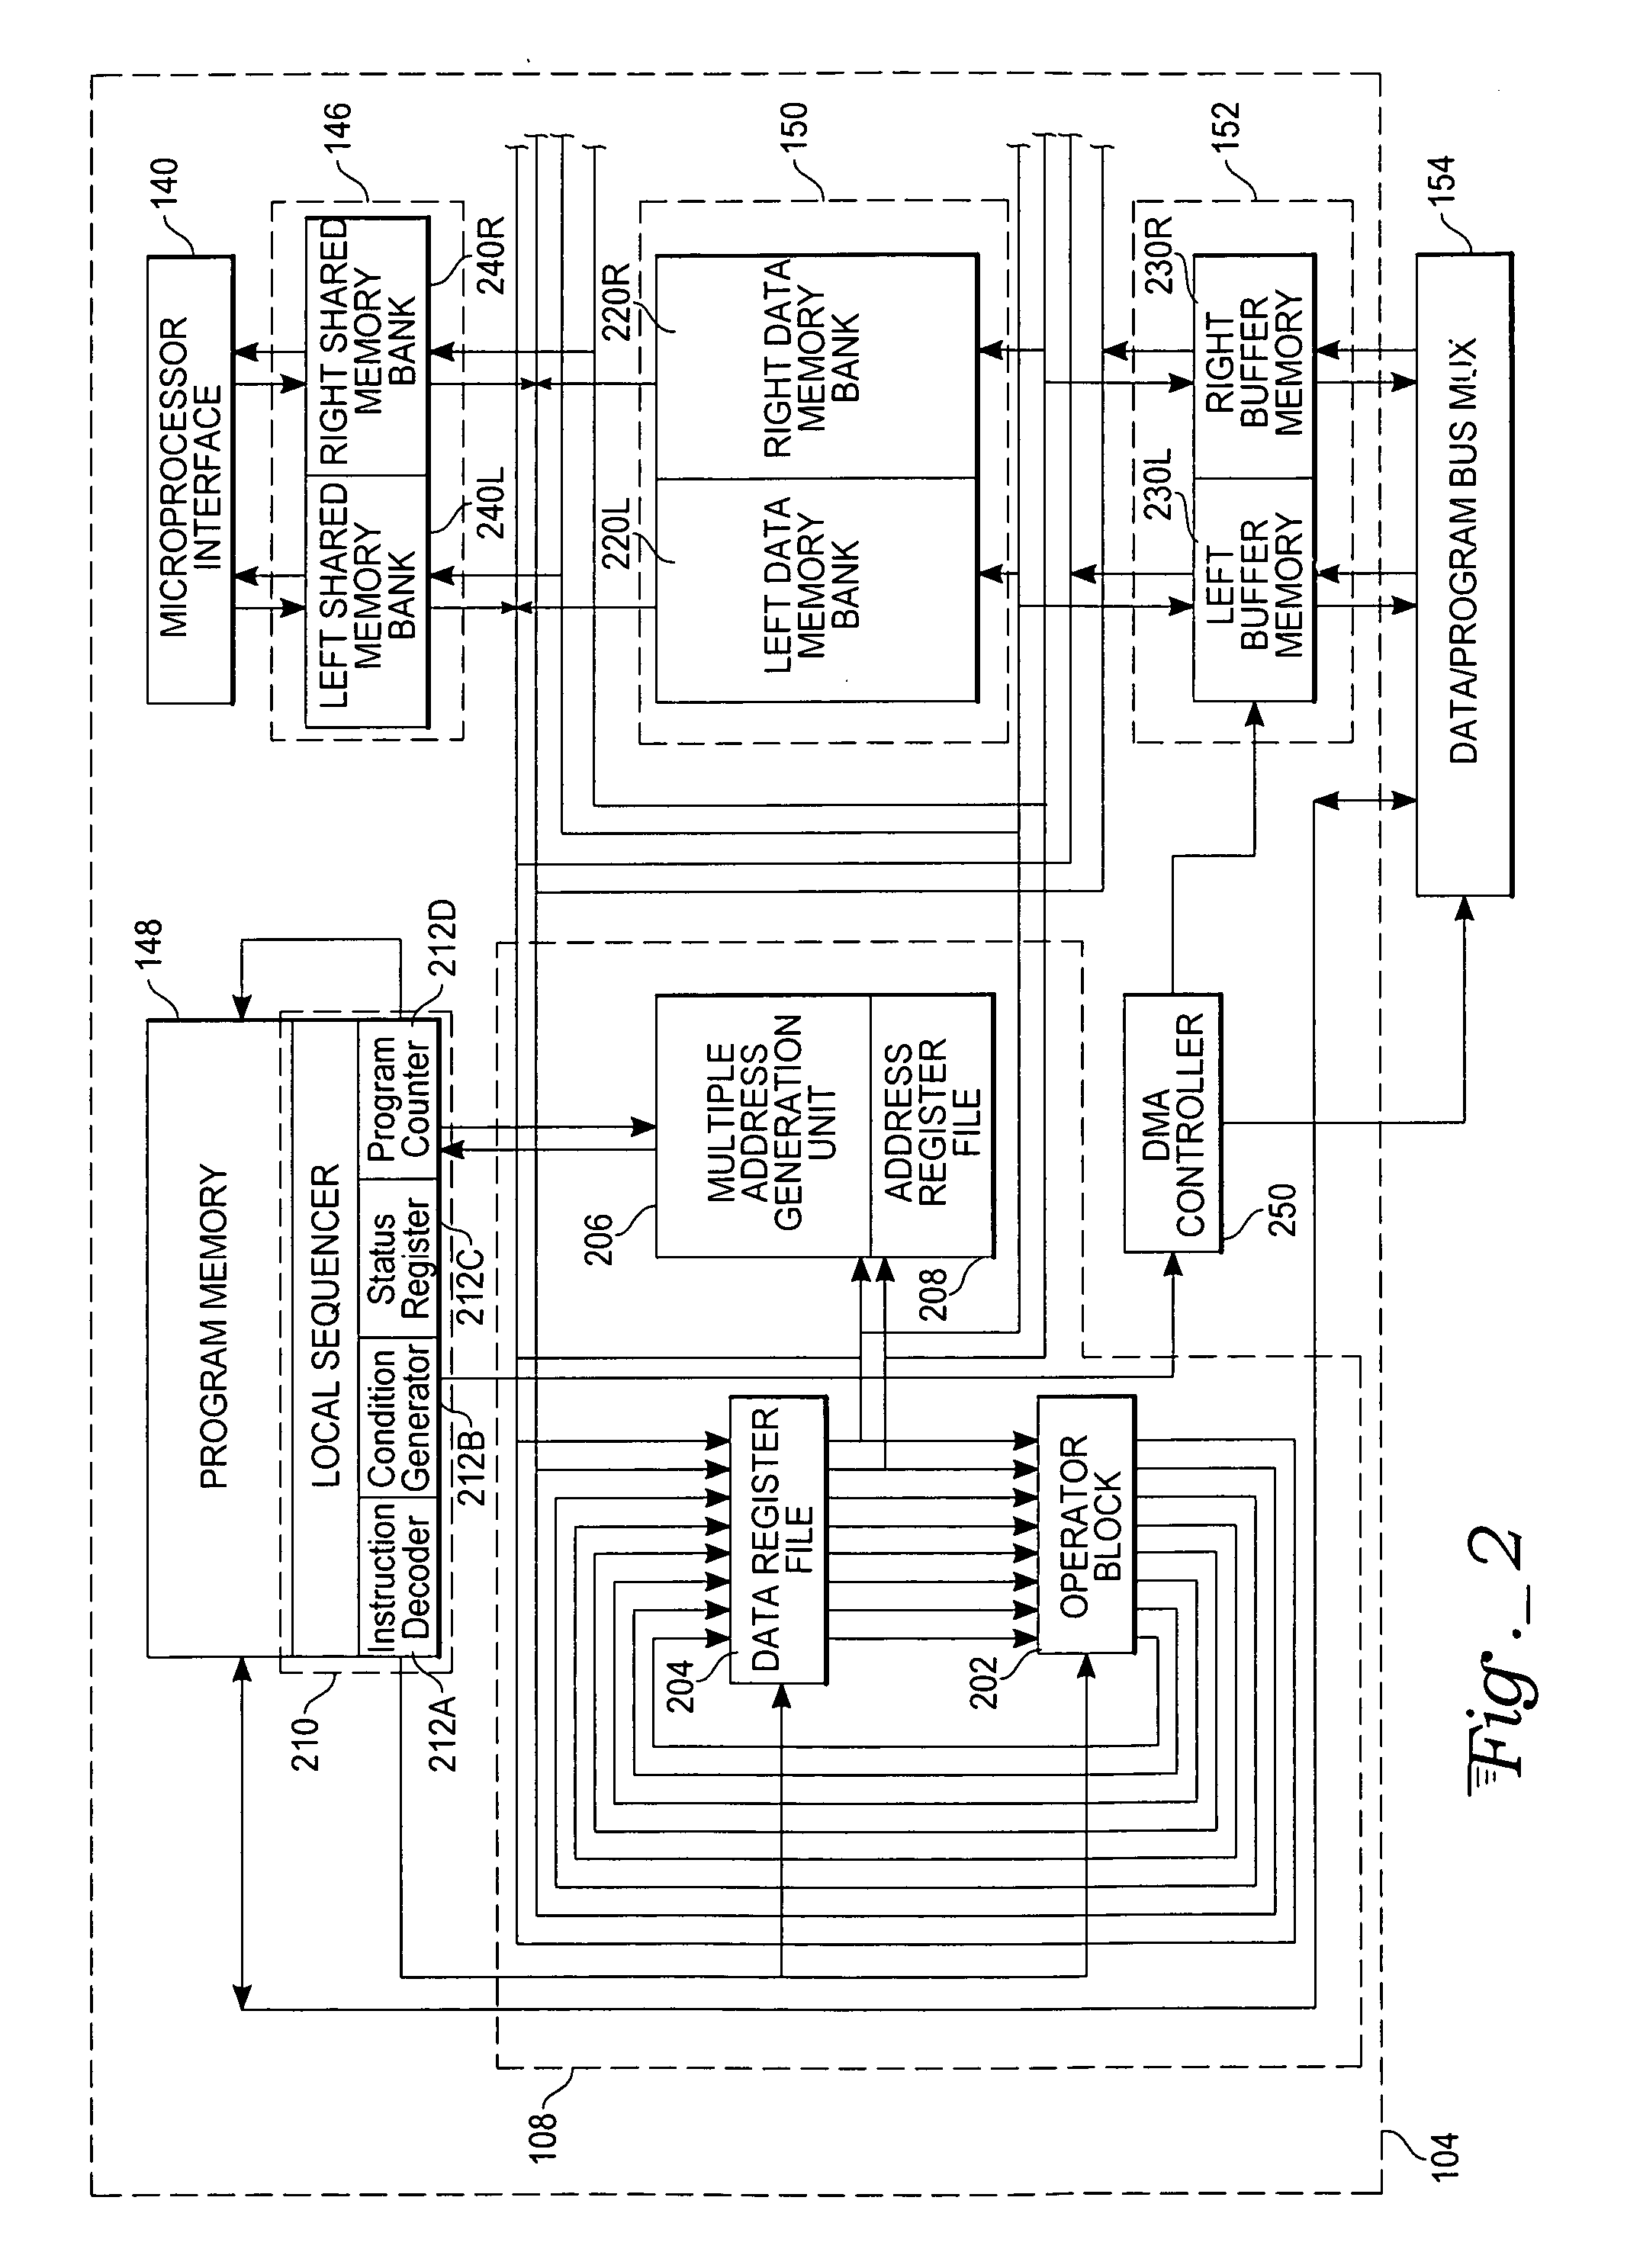 Complex domain floating point VLIW DSP with data/program bus multiplexer and microprocessor interface